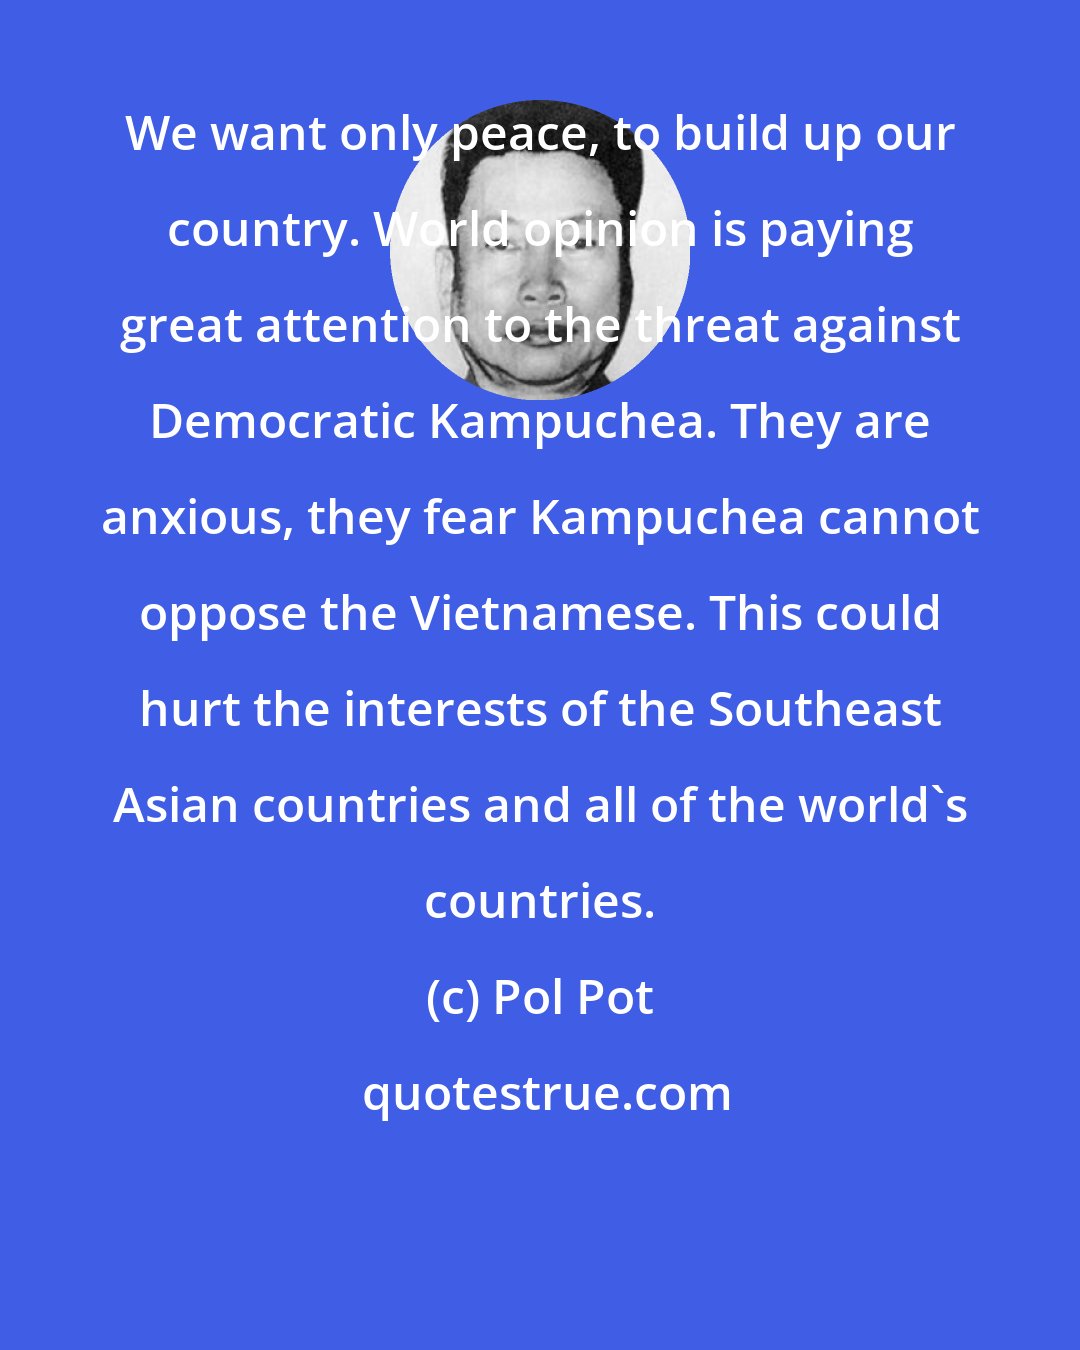 Pol Pot: We want only peace, to build up our country. World opinion is paying great attention to the threat against Democratic Kampuchea. They are anxious, they fear Kampuchea cannot oppose the Vietnamese. This could hurt the interests of the Southeast Asian countries and all of the world's countries.